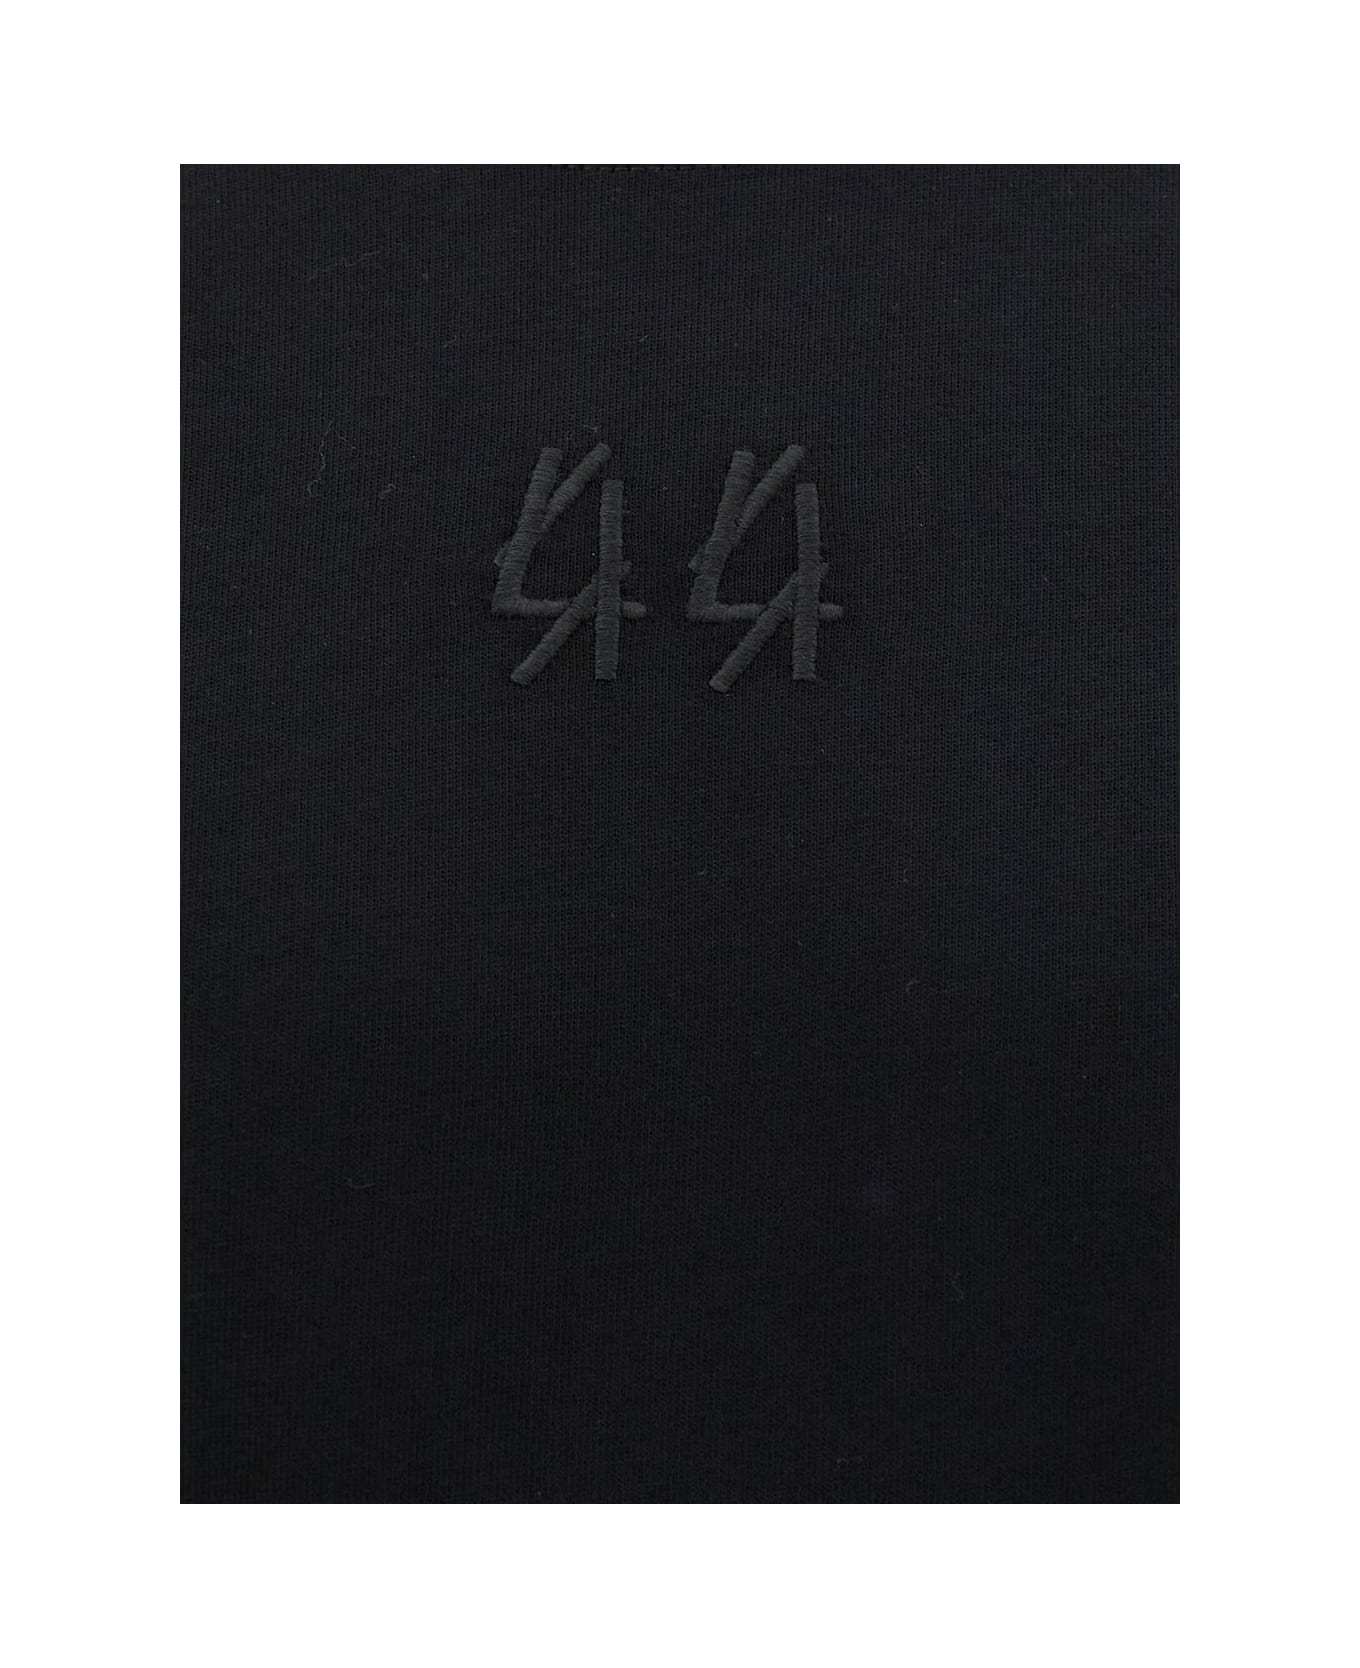 44 Label Group Black T-shirt With Logo Embroidery And Print In Cotton Man T-Shirt - BLACK シャツ